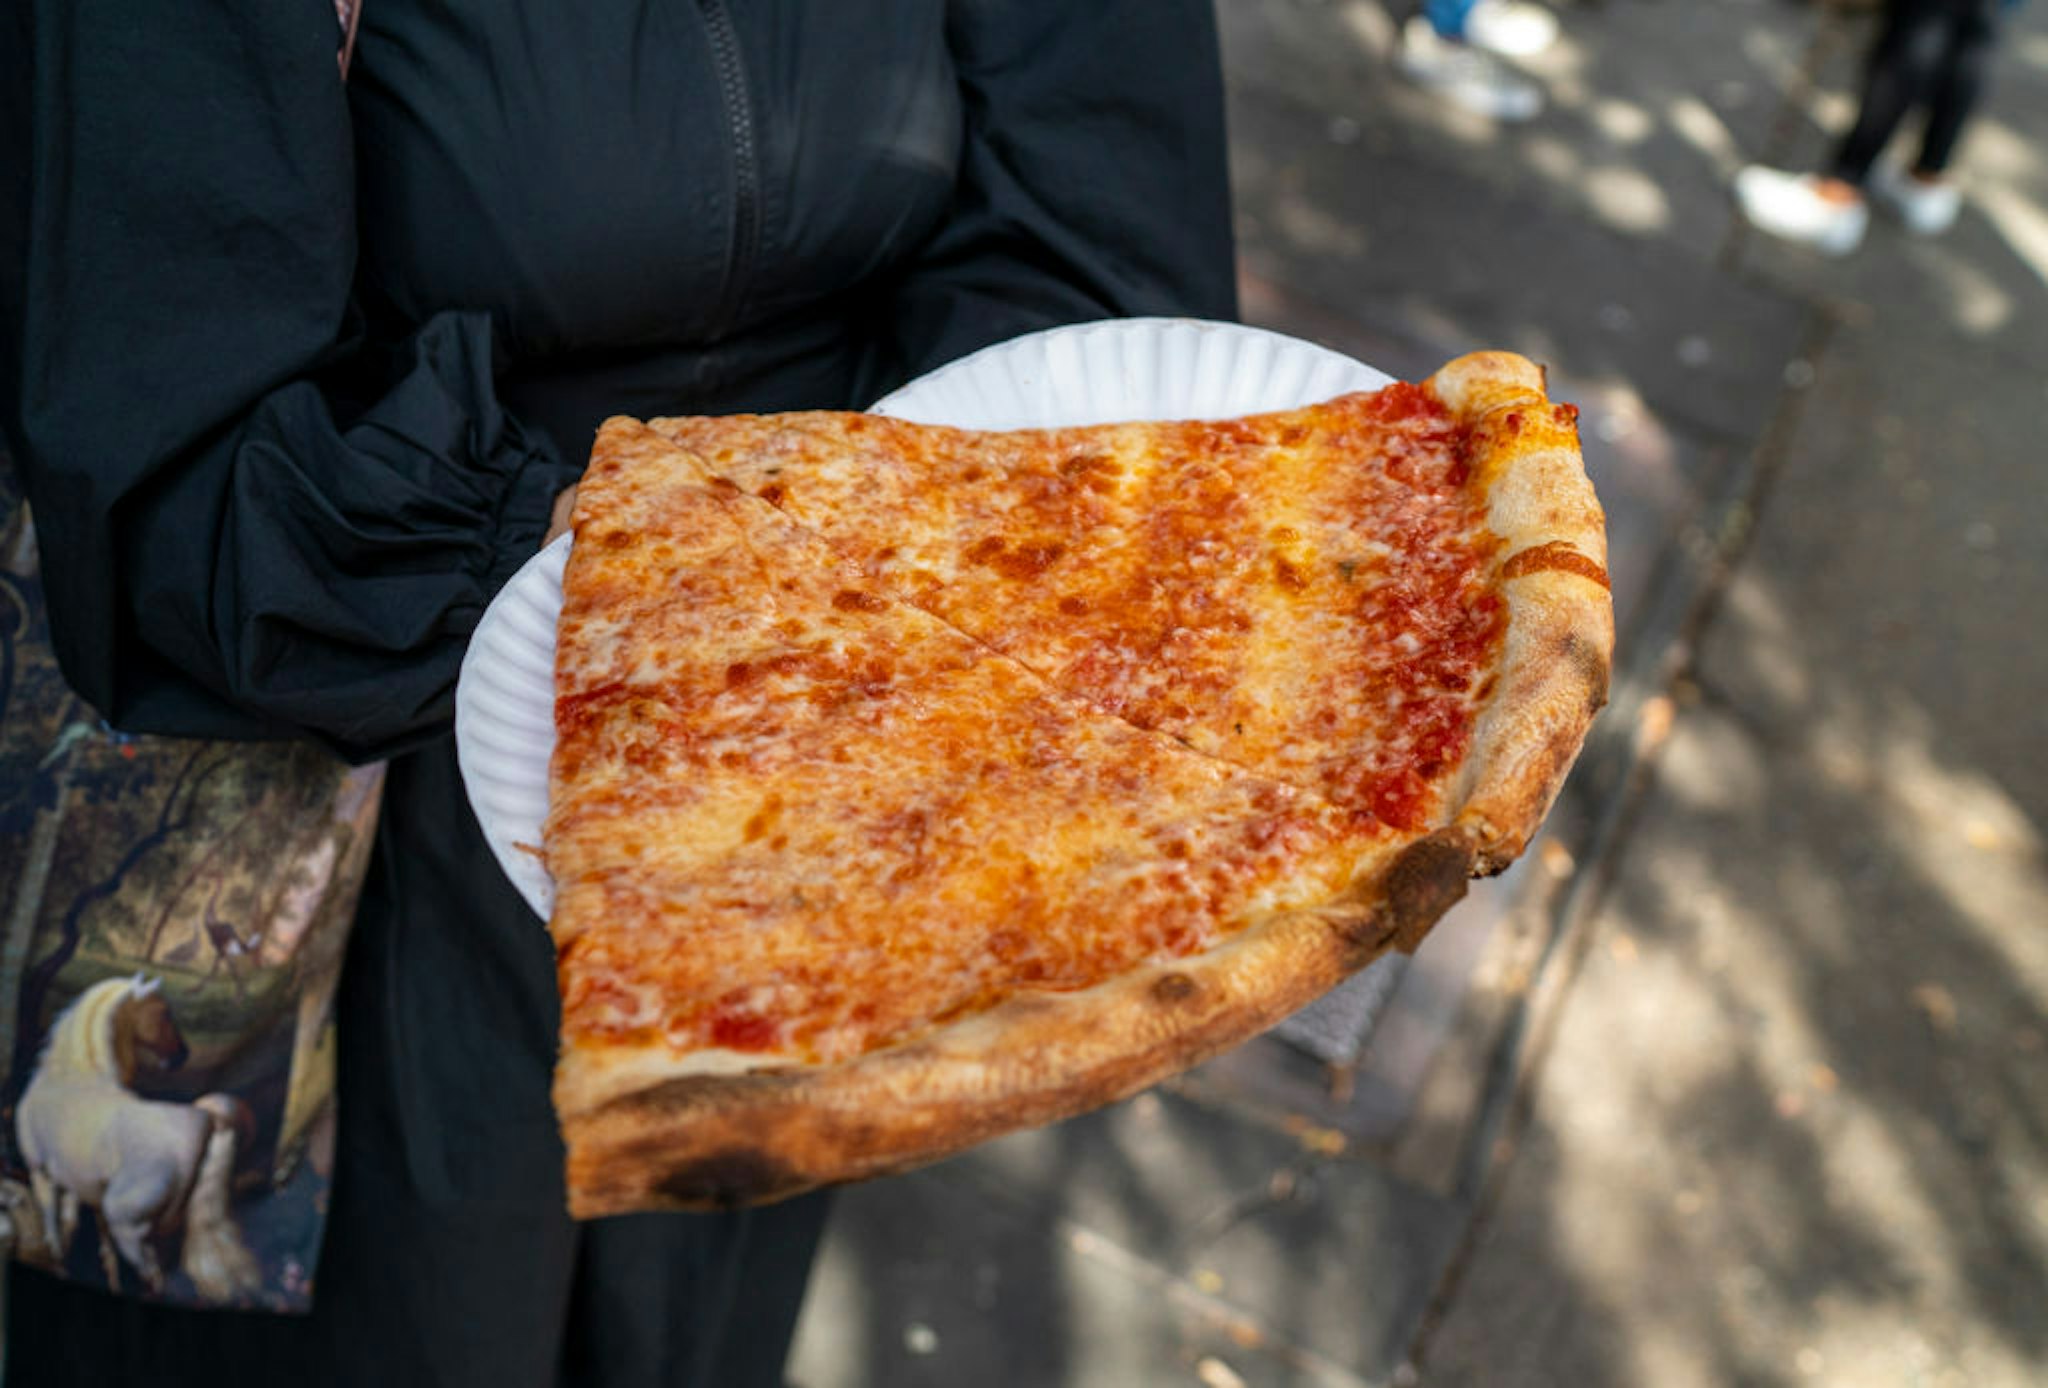 NEW YORK, NY - OCTOBER 23: A tourist carries freshly made pizza slices from Joe's Pizza on Carmine Street October 23, 2021 in New York City. Over 500,000 pizzas are sold everyday in New York City. (Photo by Robert Nickelsberg/Getty Images)